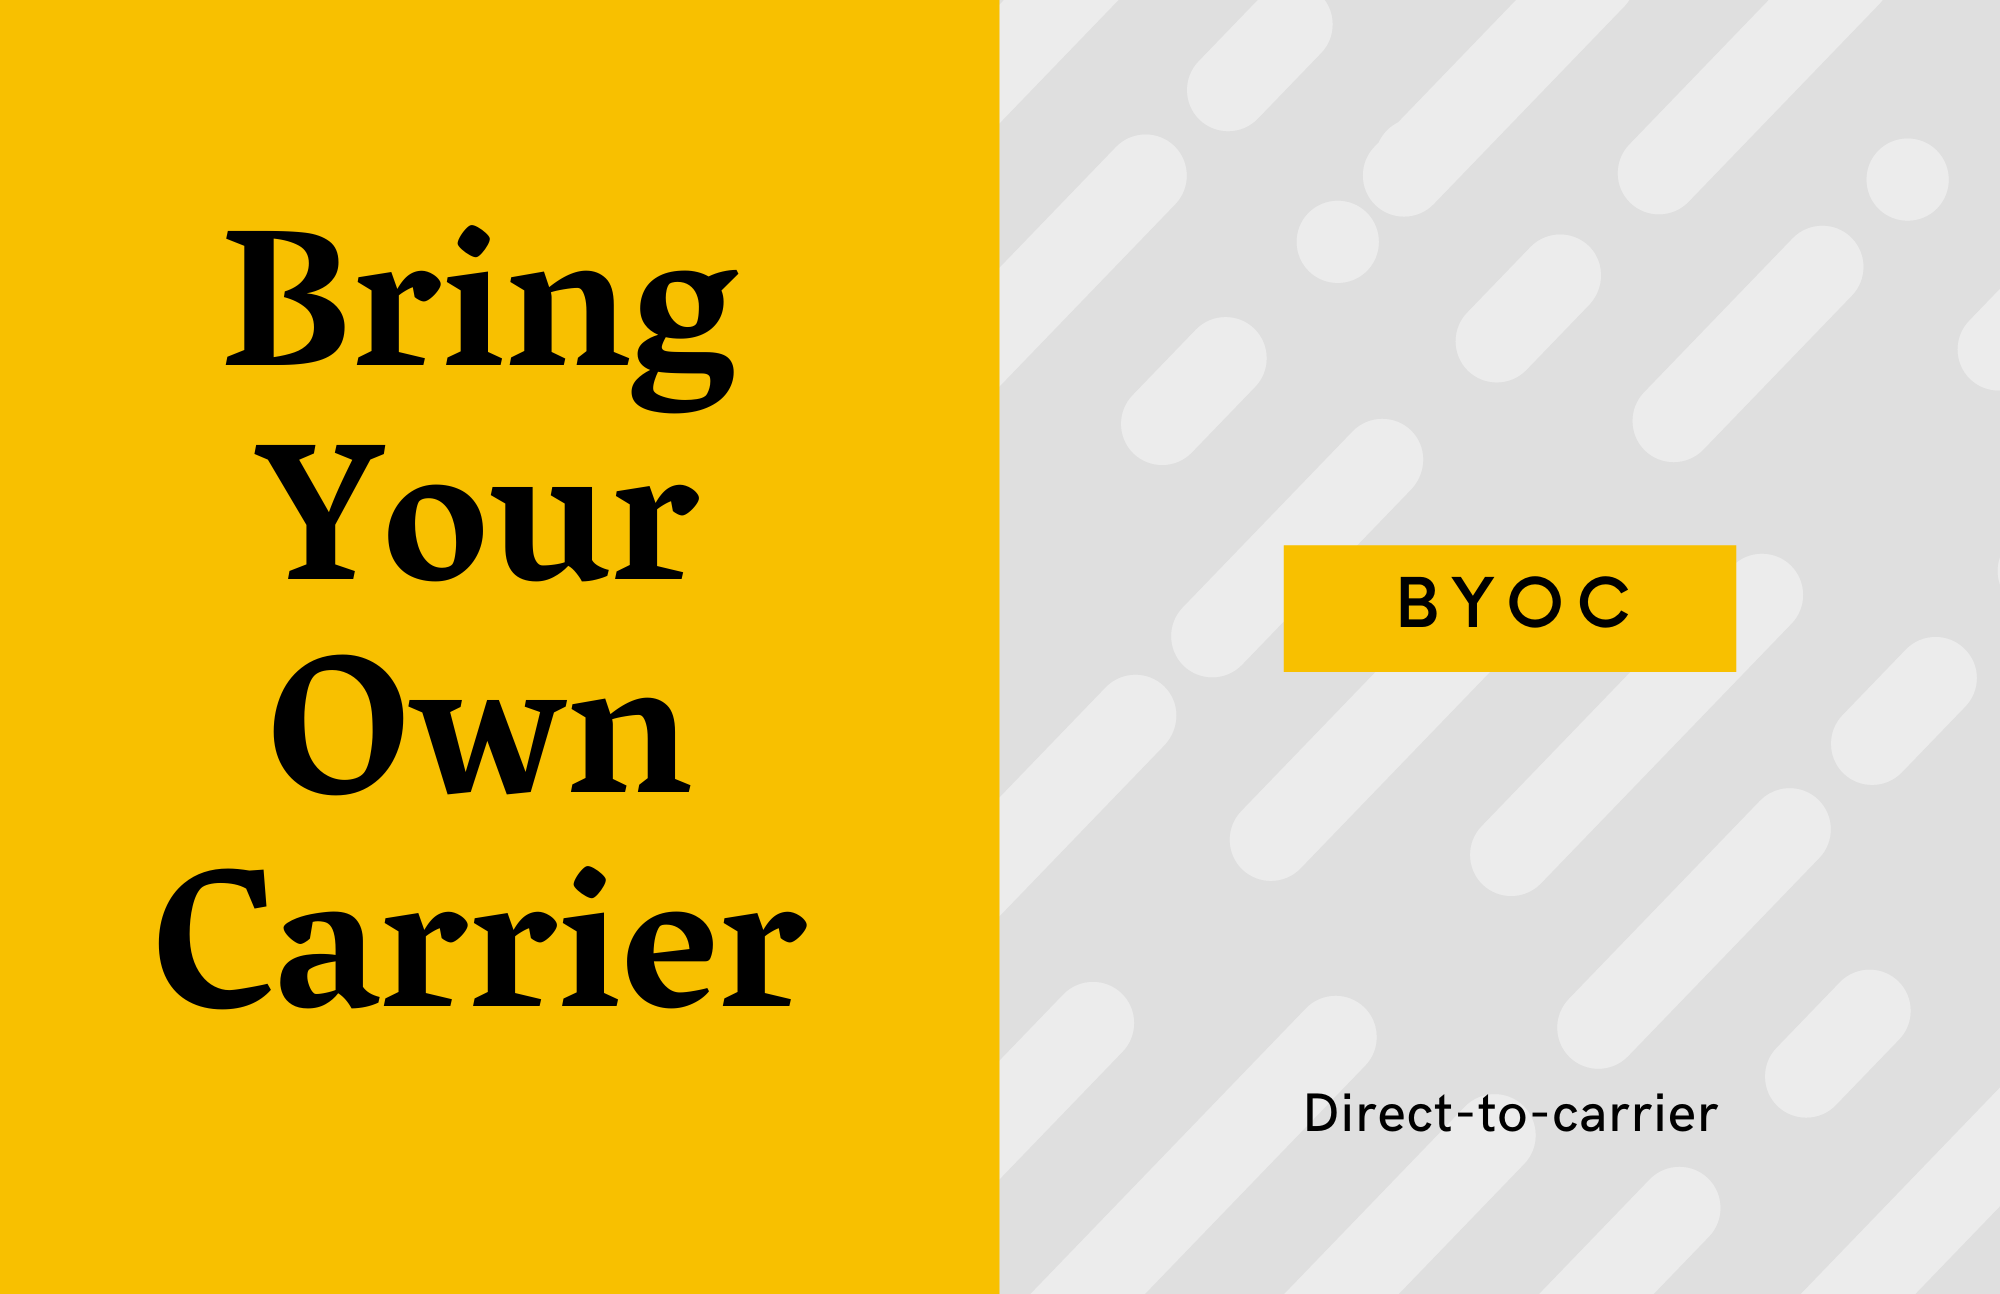 What is bring your own carrier BYOC